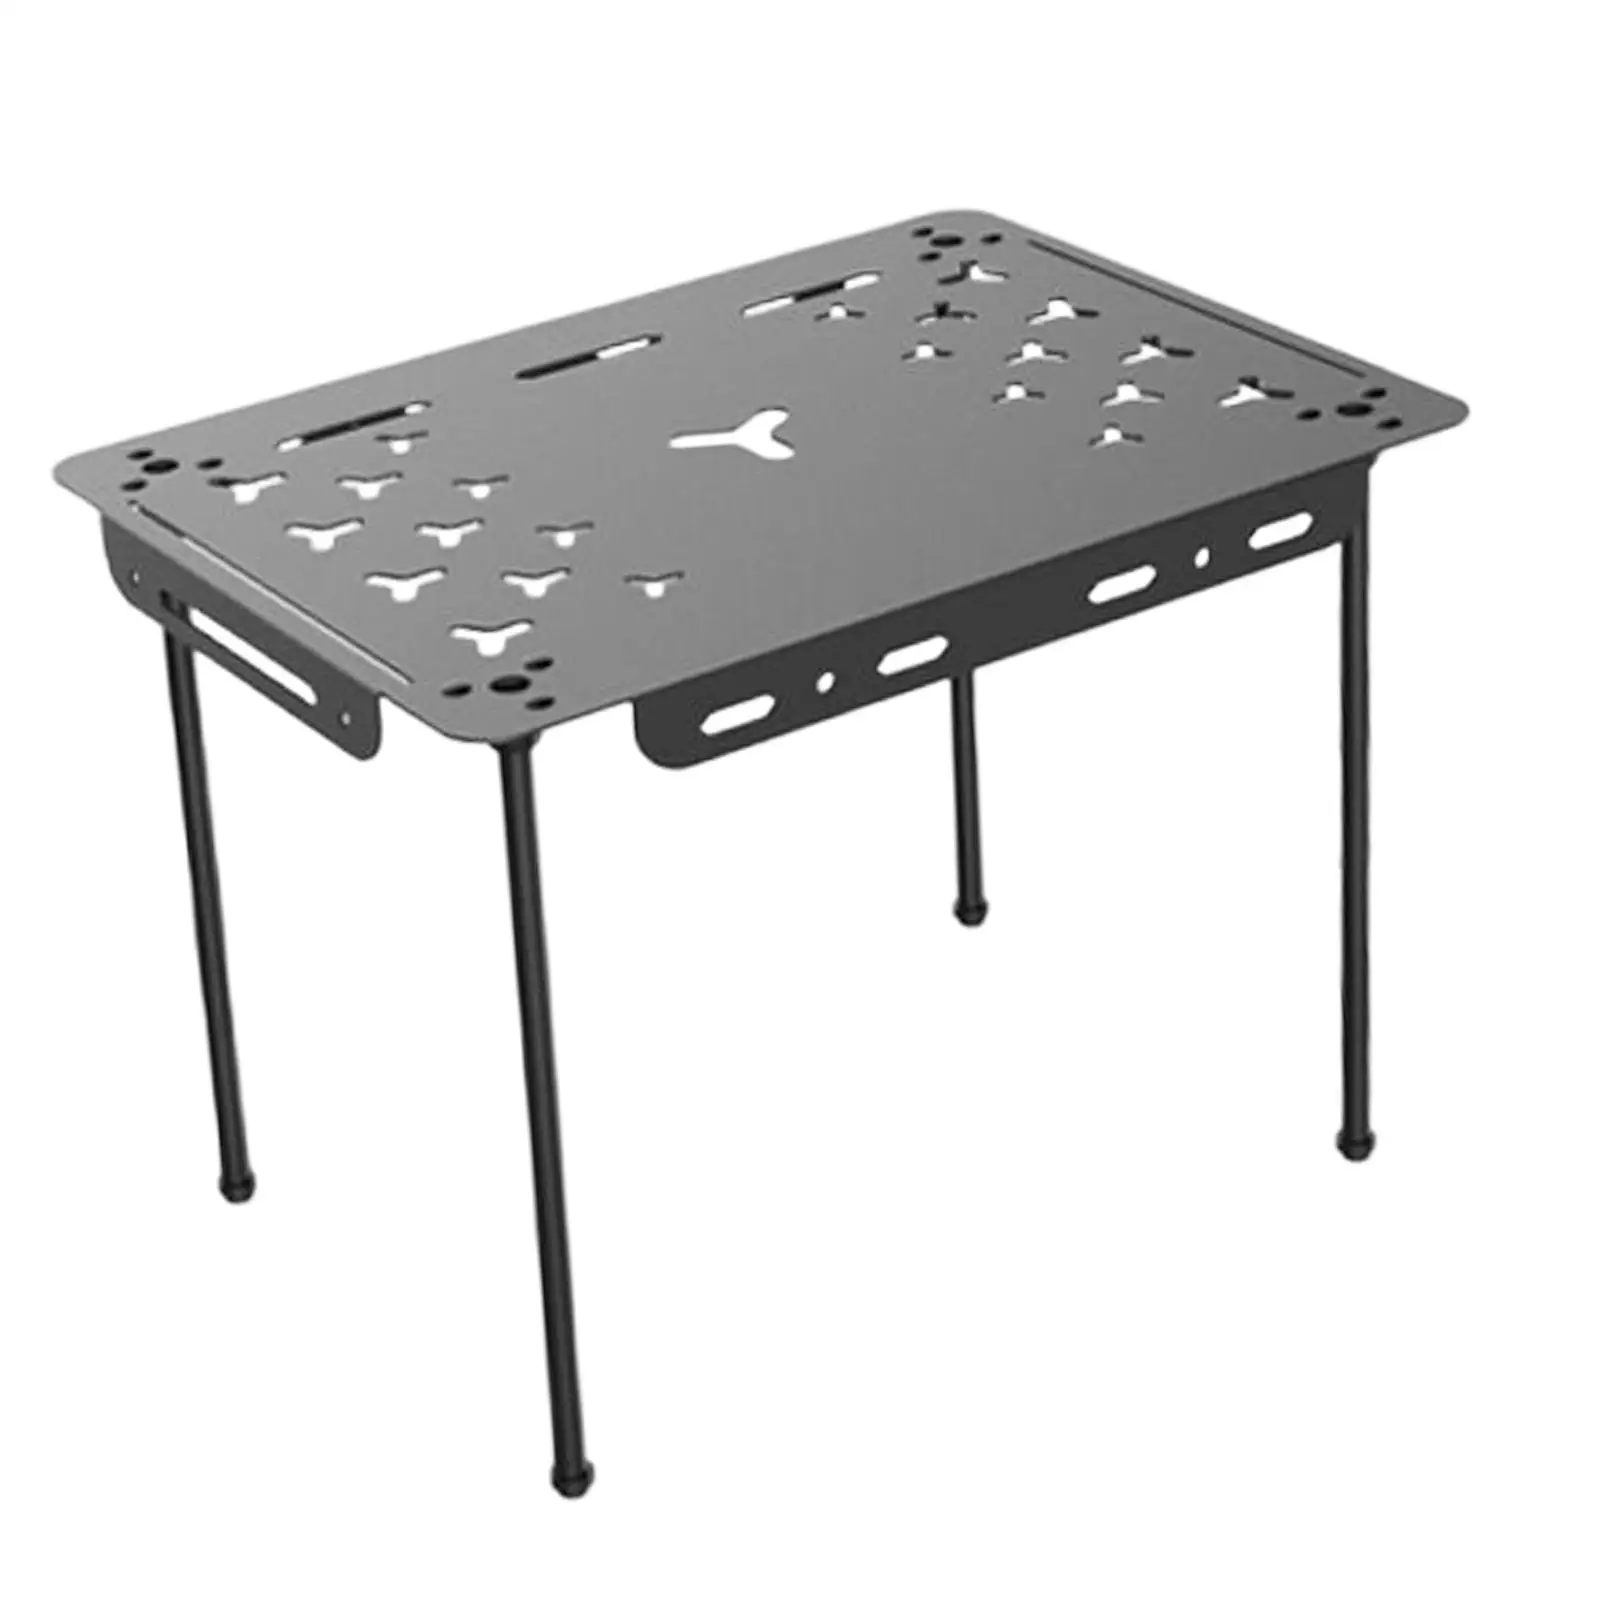 Portable Camping Foldable Table Rack Collapsible Desk Heavy Duty Furniture Tableware for Picnic Outdoor Traveling Cooking Beach